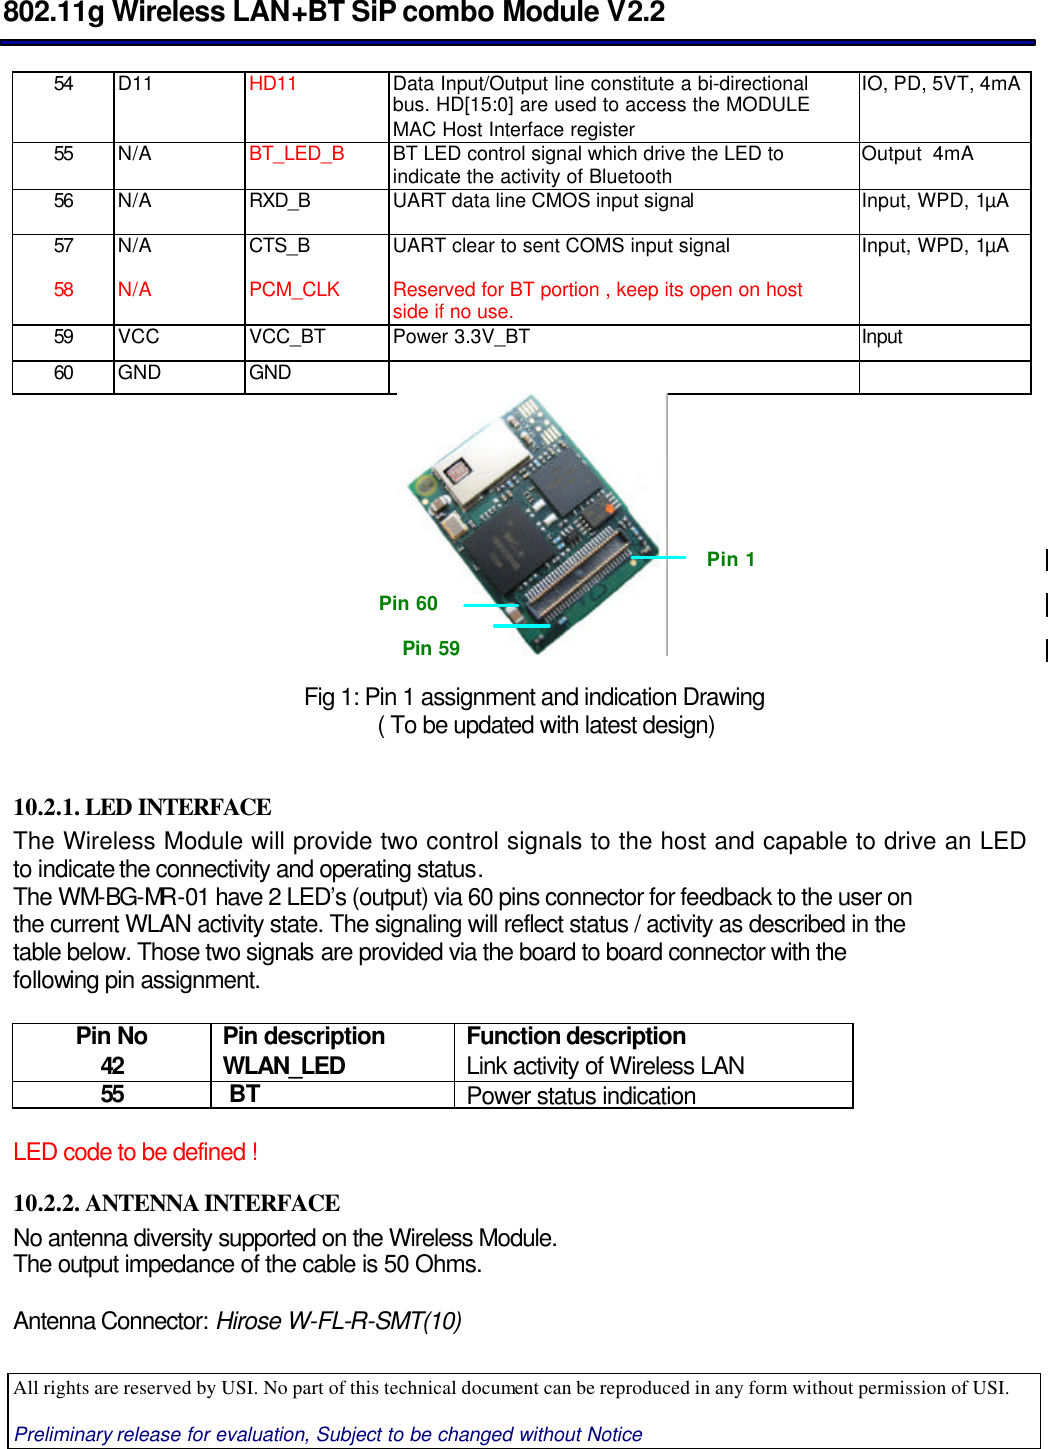  802.11g Wireless LAN+BT SiP combo Module V2.2  All rights are reserved by USI. No part of this technical document can be reproduced in any form without permission of USI.  Preliminary release for evaluation, Subject to be changed without Notice                                      54 D11 HD11 Data Input/Output line constitute a bi-directional bus. HD[15:0] are used to access the MODULE MAC Host Interface register IO, PD, 5VT, 4mA  55 N/A BT_LED_B BT LED control signal which drive the LED to indicate the activity of Bluetooth Output  4mA 56 N/A RXD_B UART data line CMOS input signal Input, WPD, 1µA 57 N/A CTS_B UART clear to sent COMS input signal Input, WPD, 1µA 58 N/A PCM_CLK Reserved for BT portion , keep its open on host side if no use.  59 VCC VCC_BT Power 3.3V_BT Input 60 GND GND                    Fig 1: Pin 1 assignment and indication Drawing      ( To be updated with latest design)   10.2.1. LED INTERFACE The Wireless Module will provide two control signals to the host and capable to drive an LED to indicate the connectivity and operating status.  The WM-BG-MR -01 have 2 LED’s (output) via 60 pins connector for feedback to the user on the current WLAN activity state. The signaling will reflect status / activity as described in the table below. Those two signals are provided via the board to board connector with the following pin assignment.    Pin No Pin description  Function description  42 WLAN_LED Link activity of Wireless LAN 55  BT Power status indication  LED code to be defined ! 10.2.2. ANTENNA INTERFACE No antenna diversity supported on the Wireless Module. The output impedance of the cable is 50 Ohms.  Antenna Connector: Hirose W-FL-R-SMT(10) Pin 1 Pin 59 Pin 60 